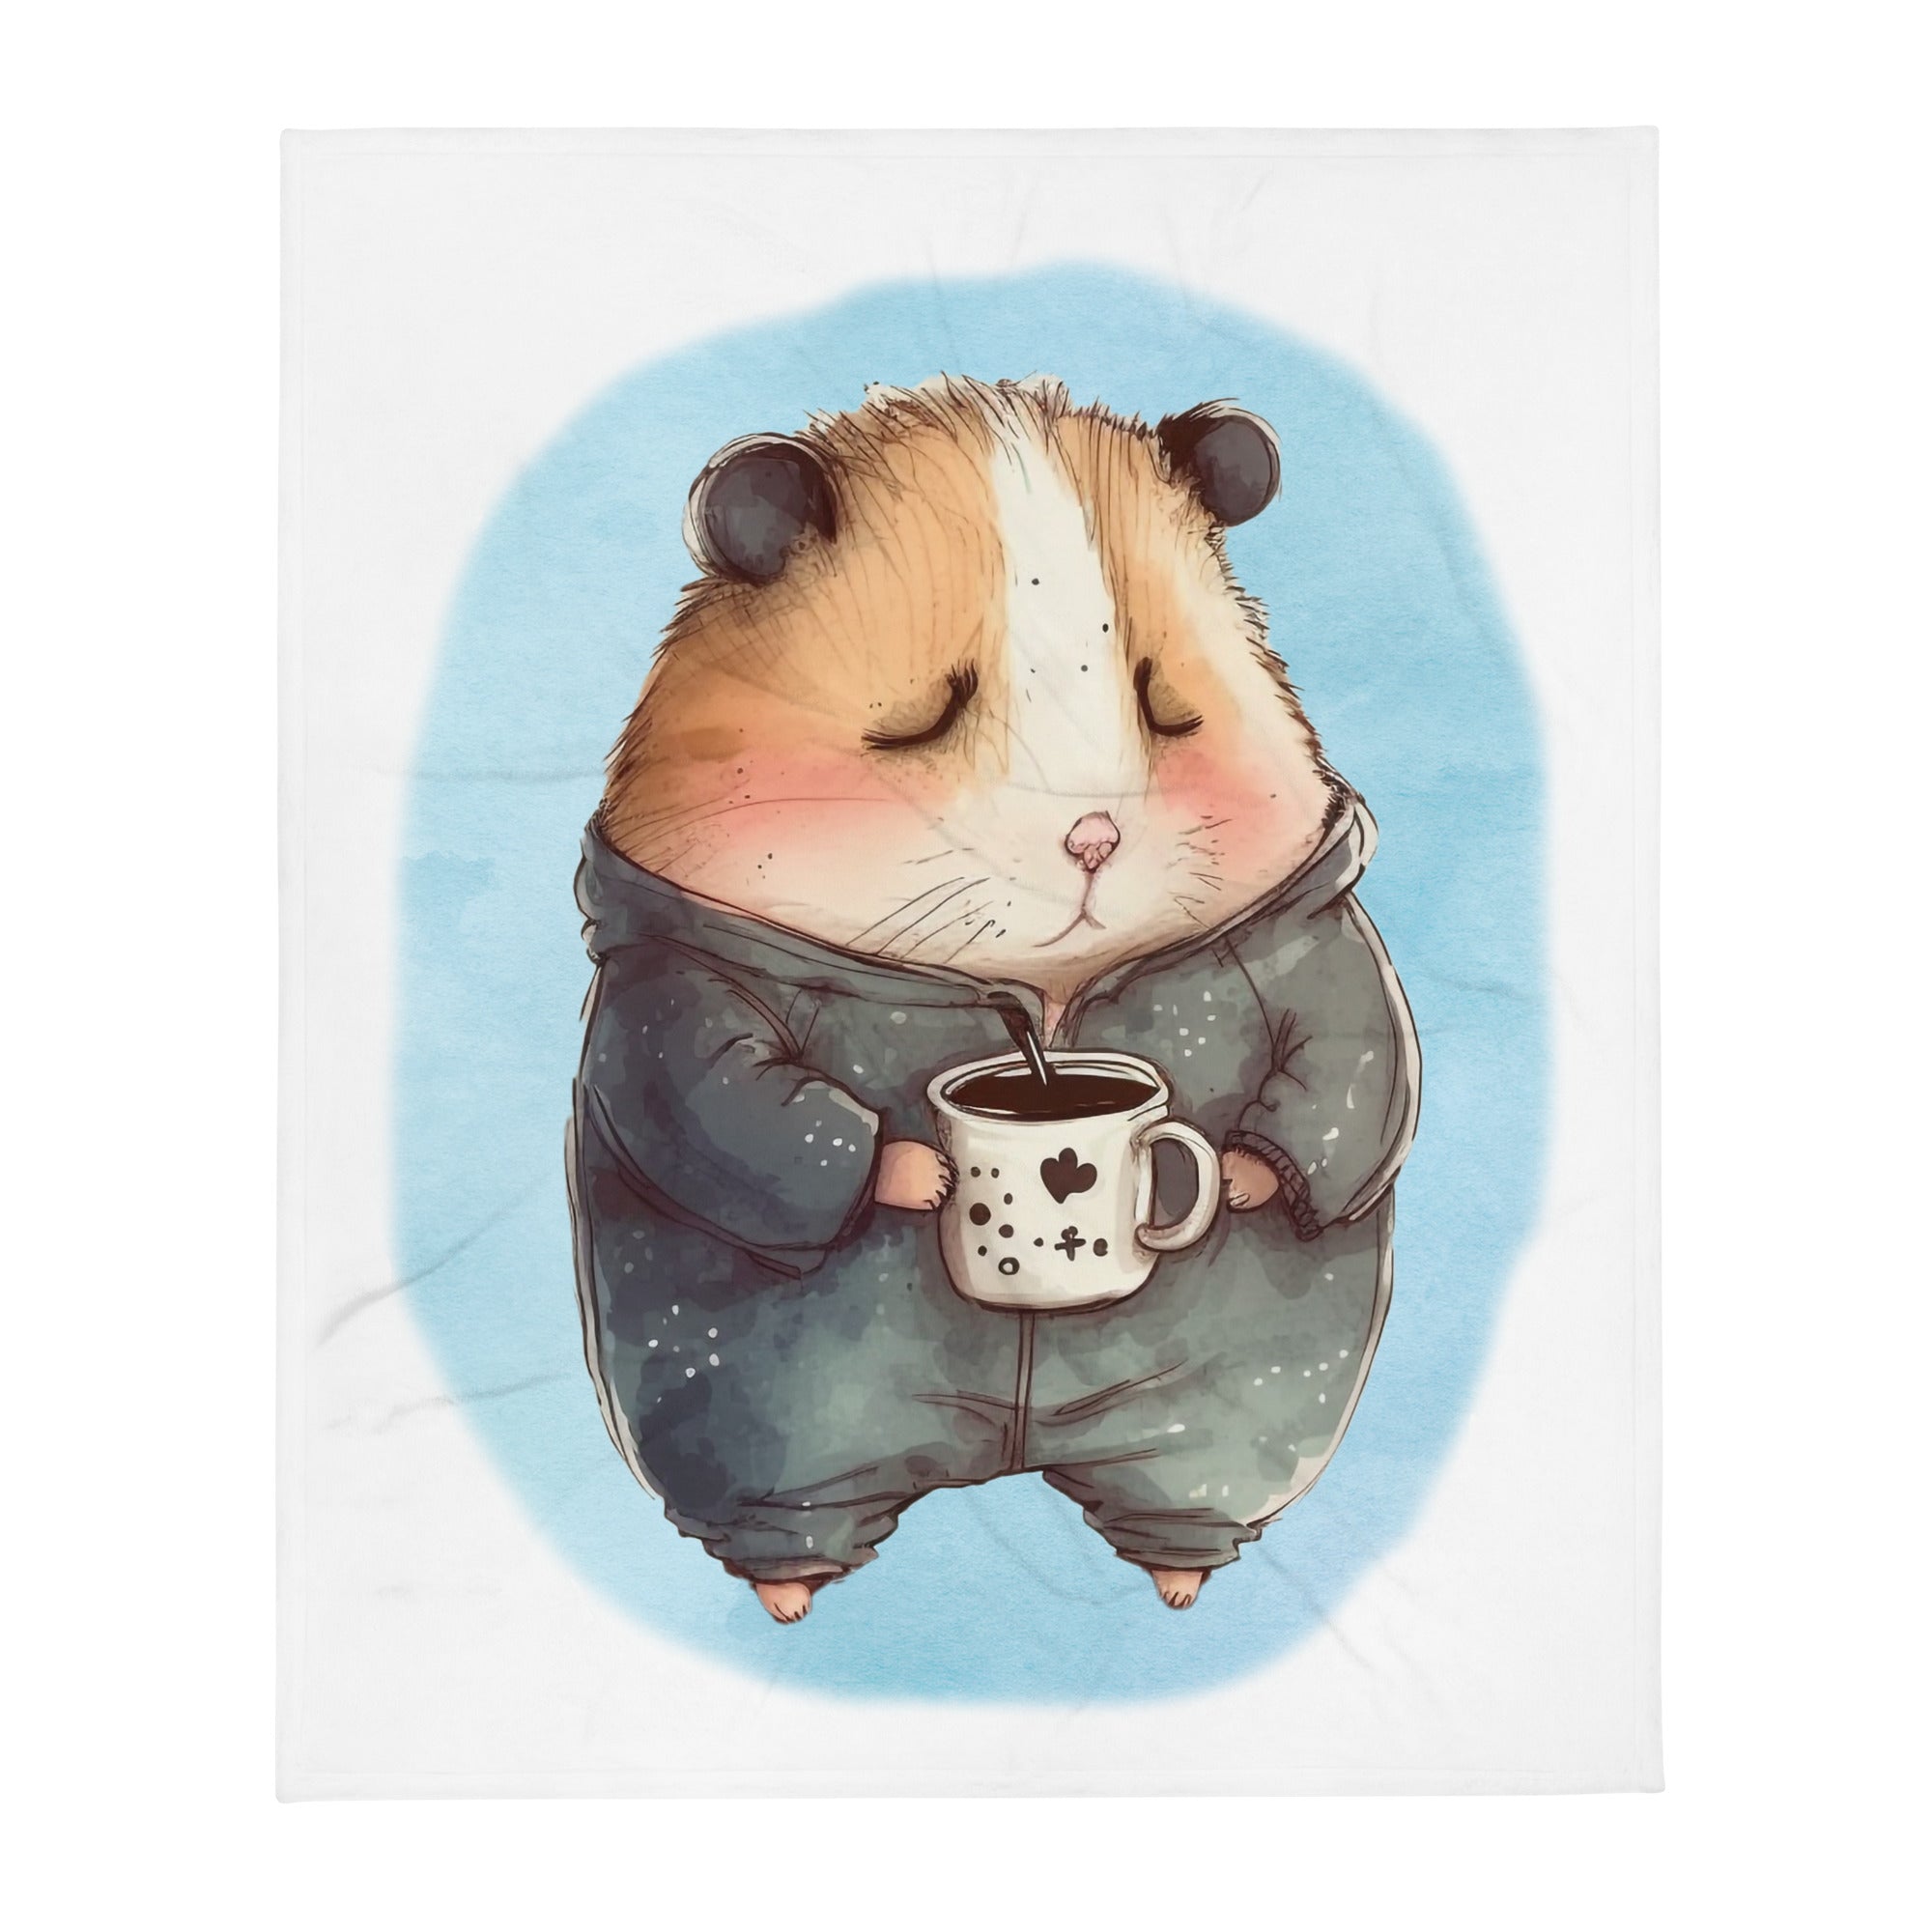 Sleepy Hamster 100% Polyester Soft Silk Touch Fabric Throw Blanket - Cozy, Durable and Adorable